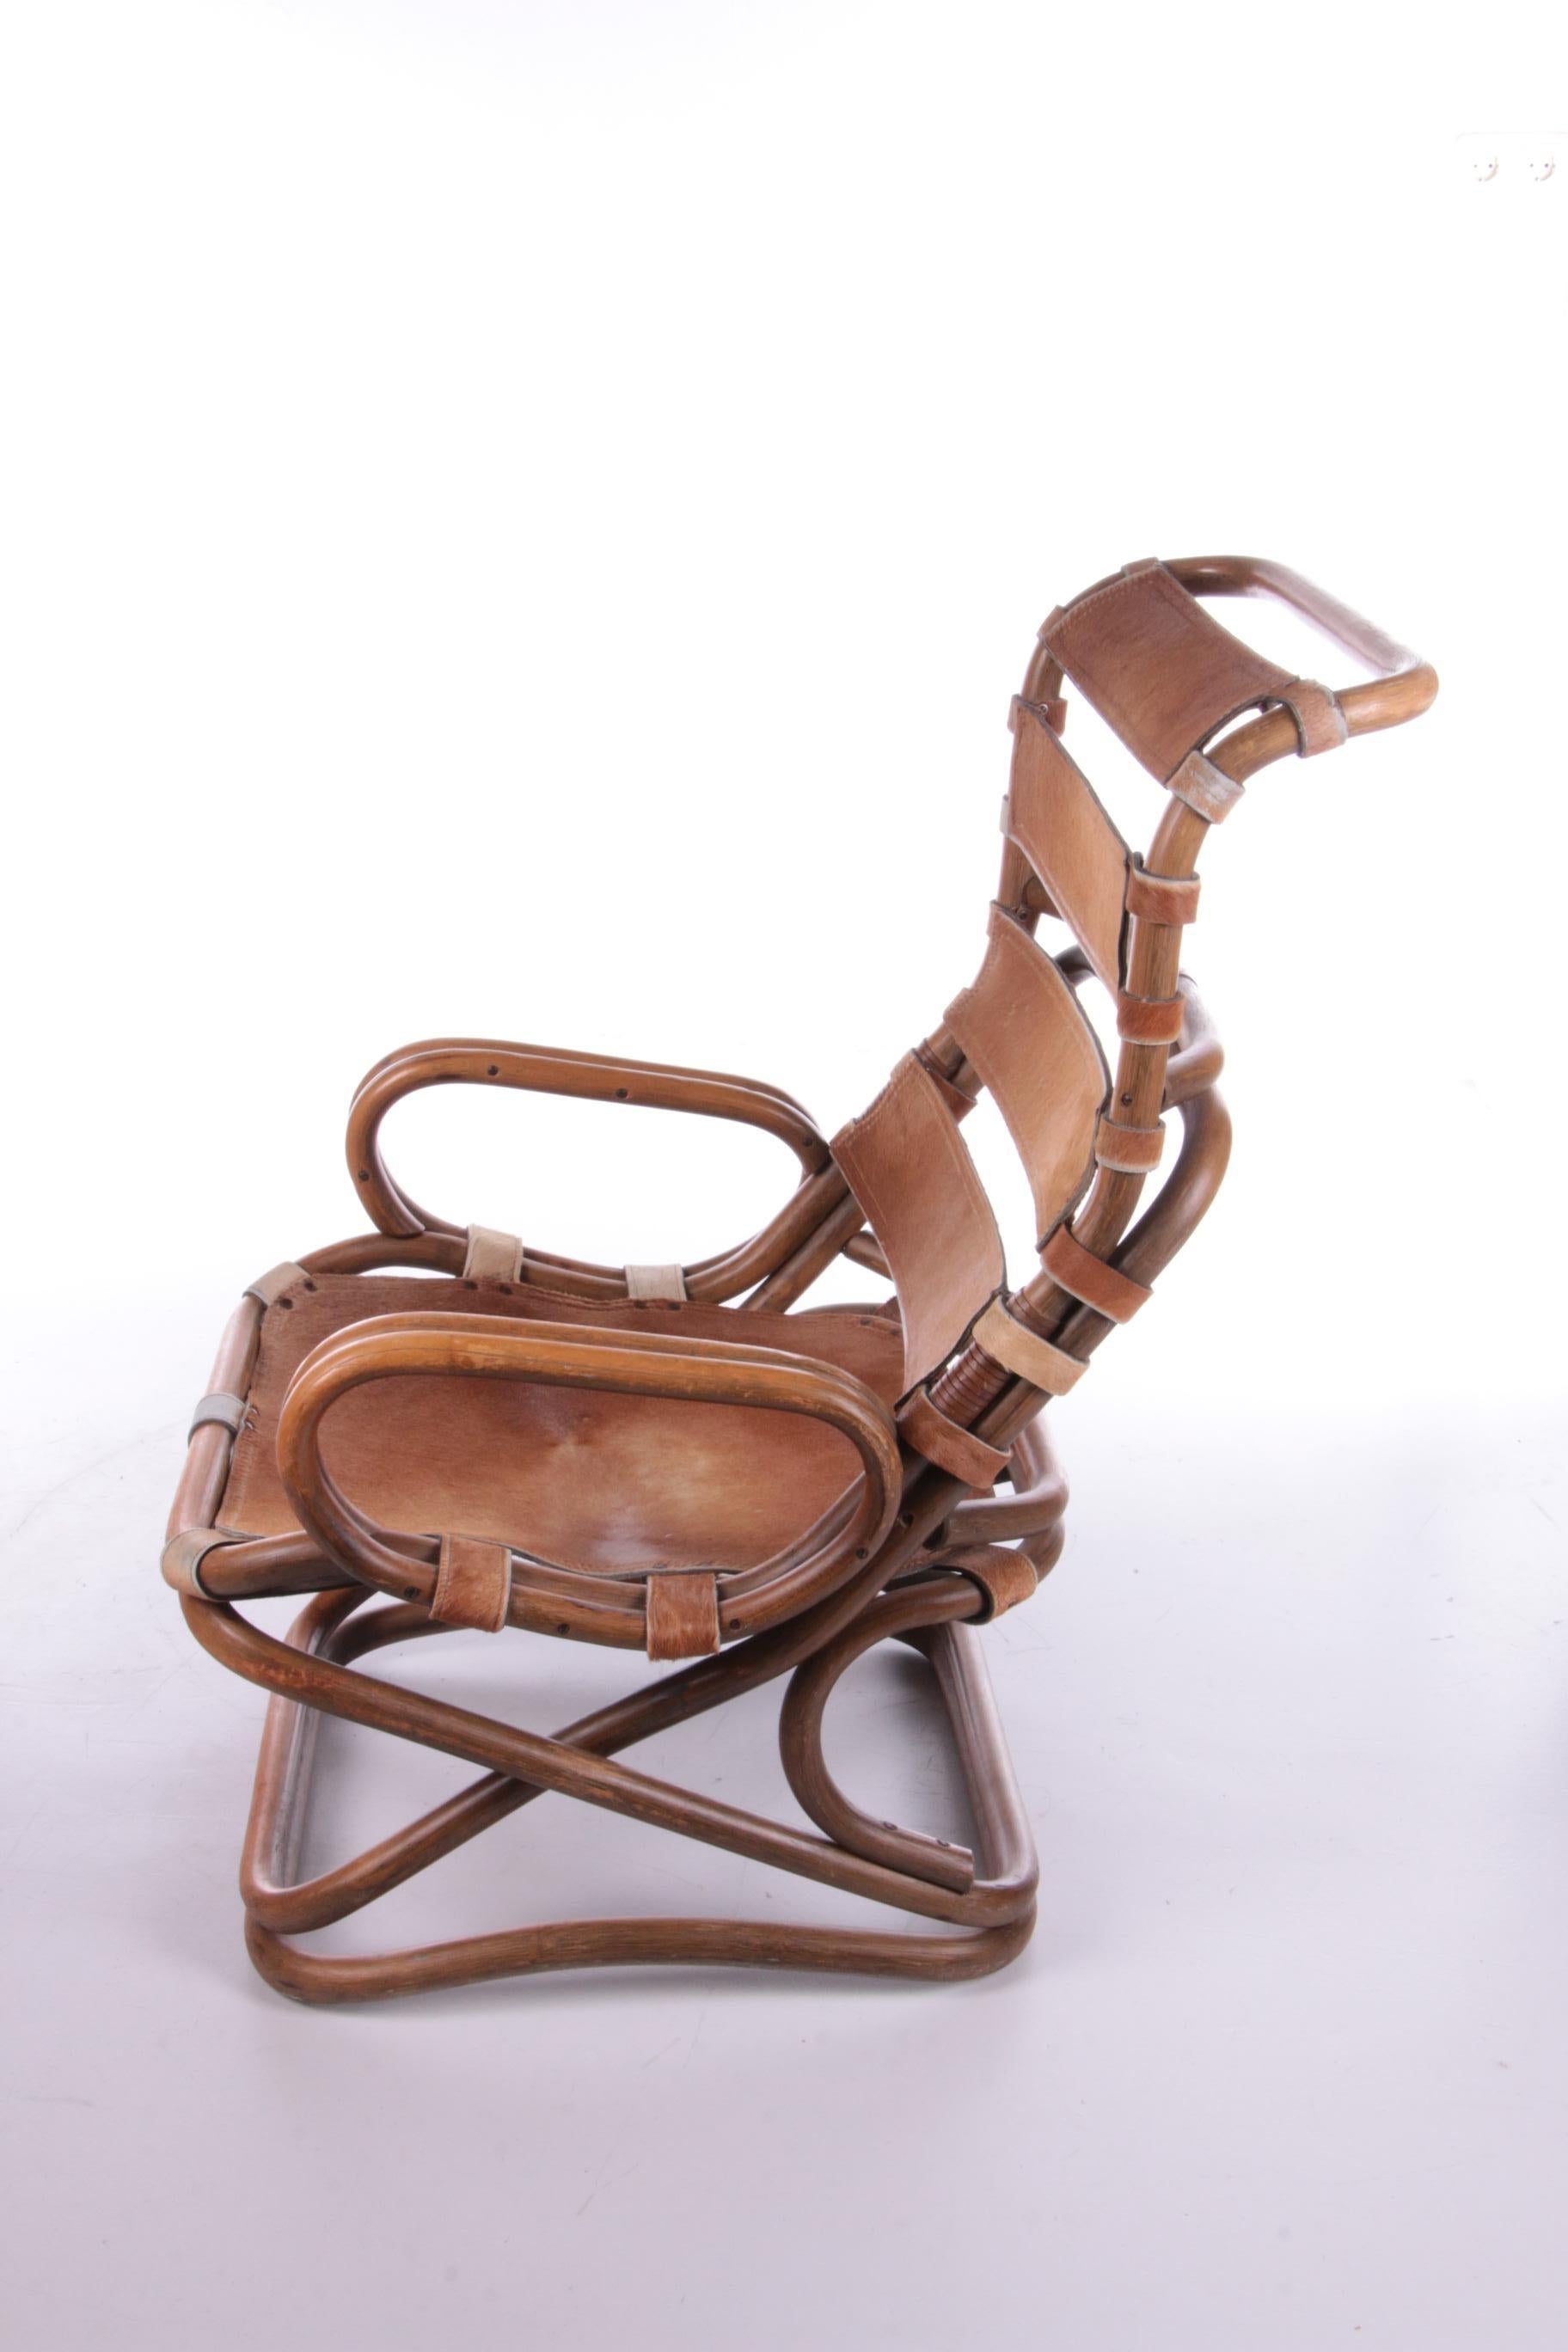 Italian Tito Agnoli Relax Chair Made of Bamboo and Leather, 1960 For Sale